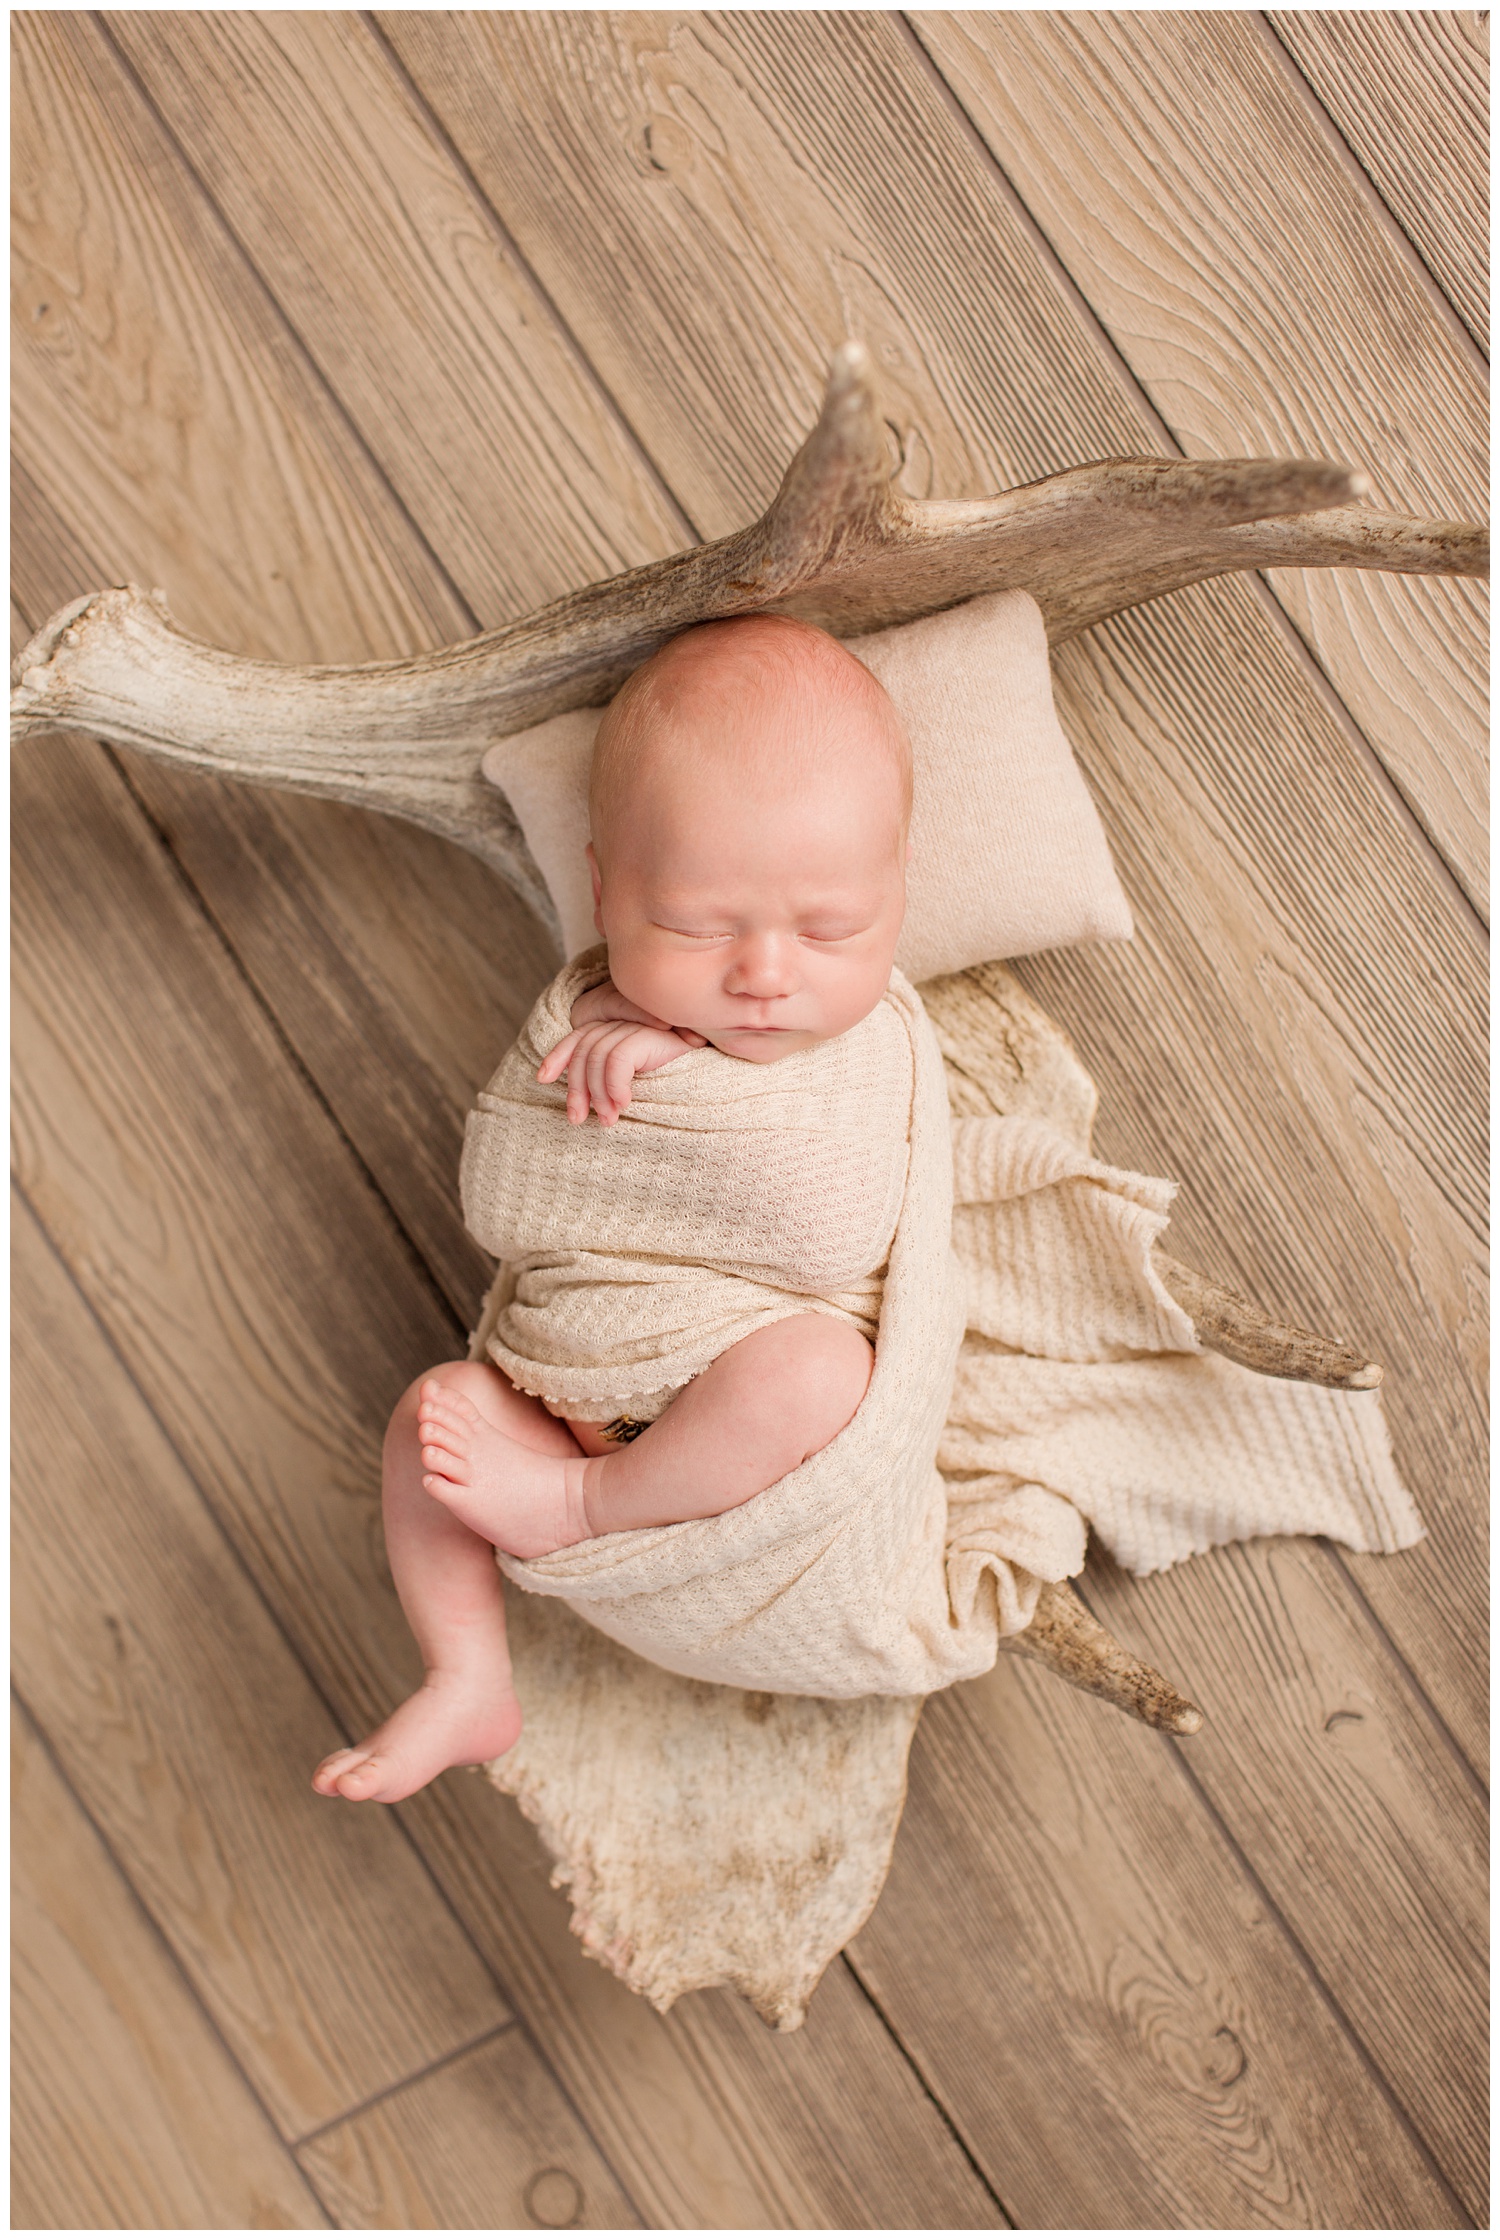 Newborn baby wrapped in a nude color swaddle laying in a moose antler on a wooden floor